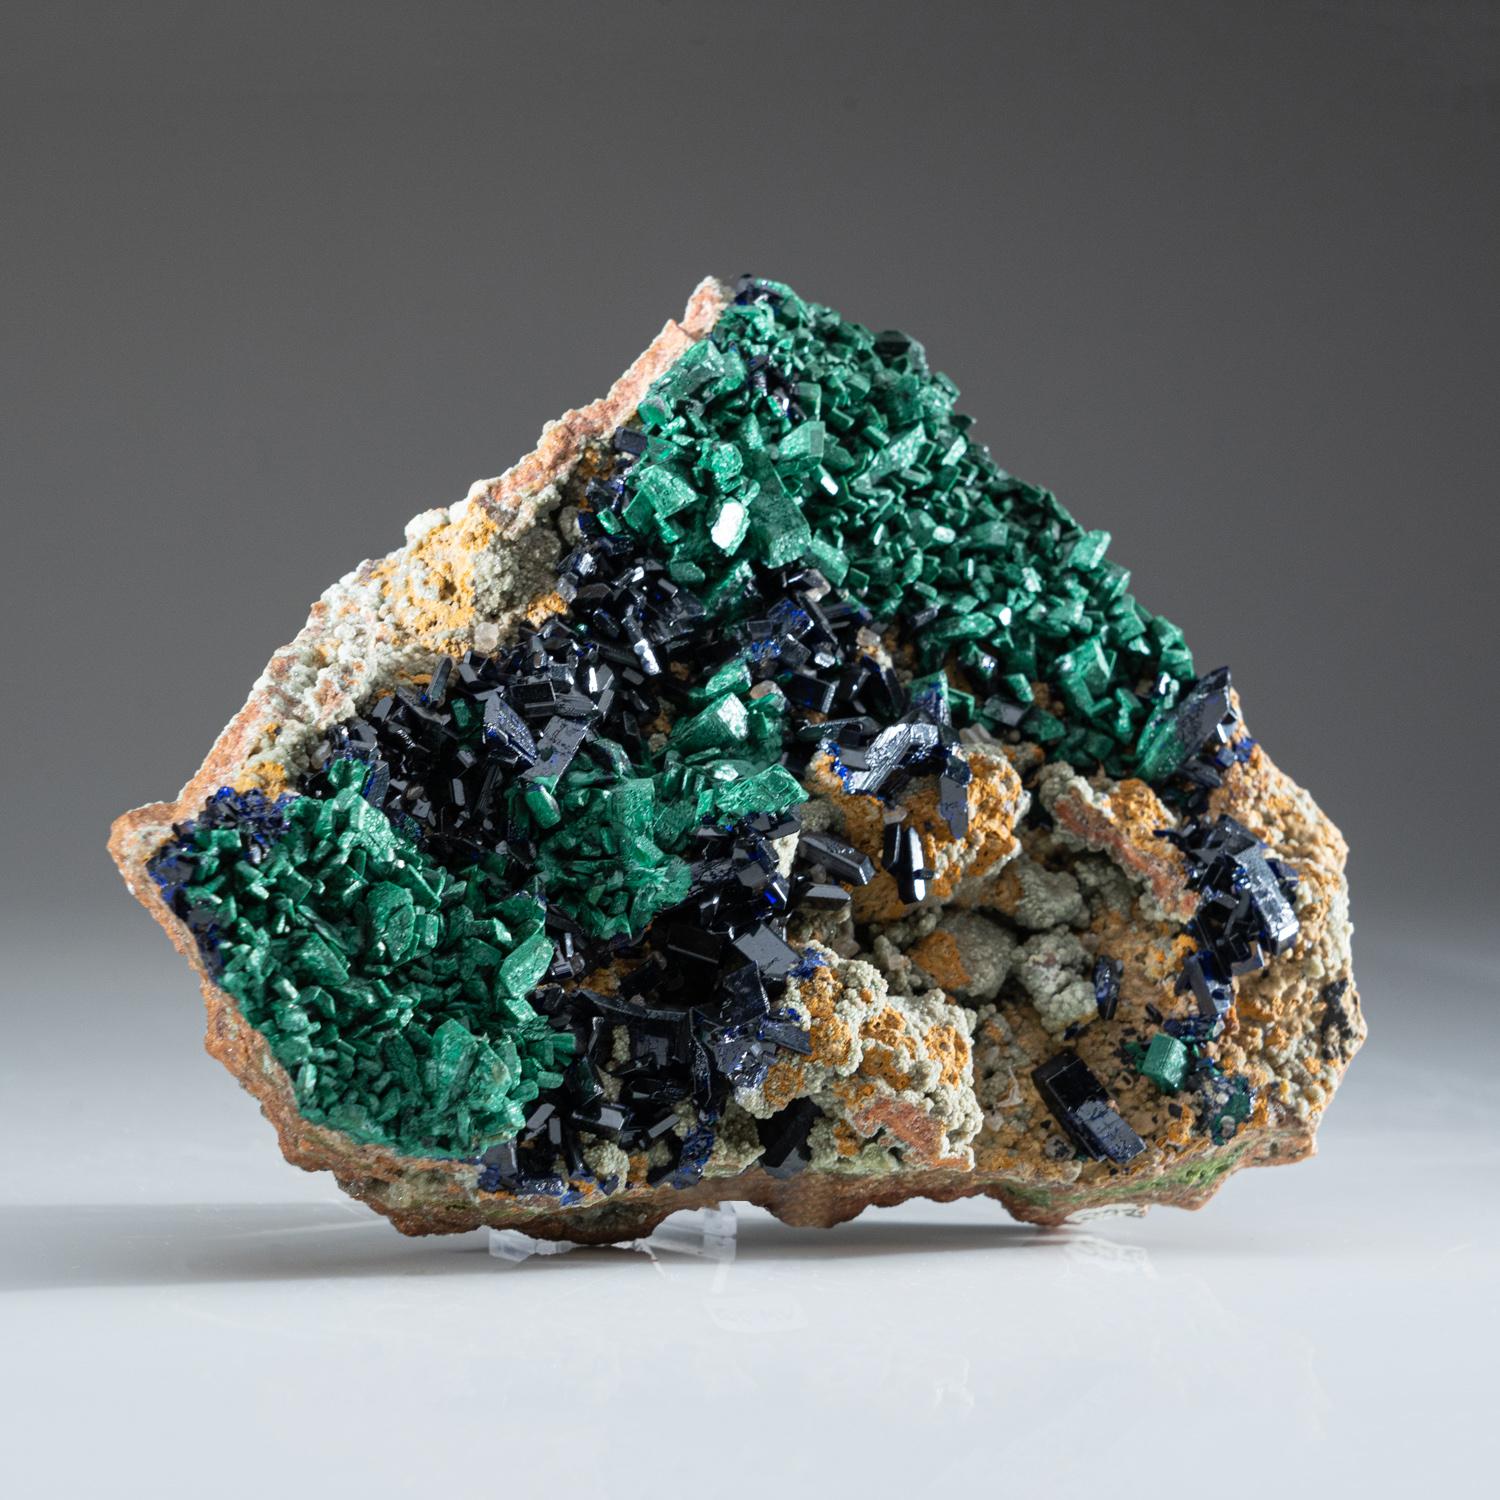 Namibian  Azurite Mineral Crystal on Malachite Calcite Matrix From , Namibia For Sale